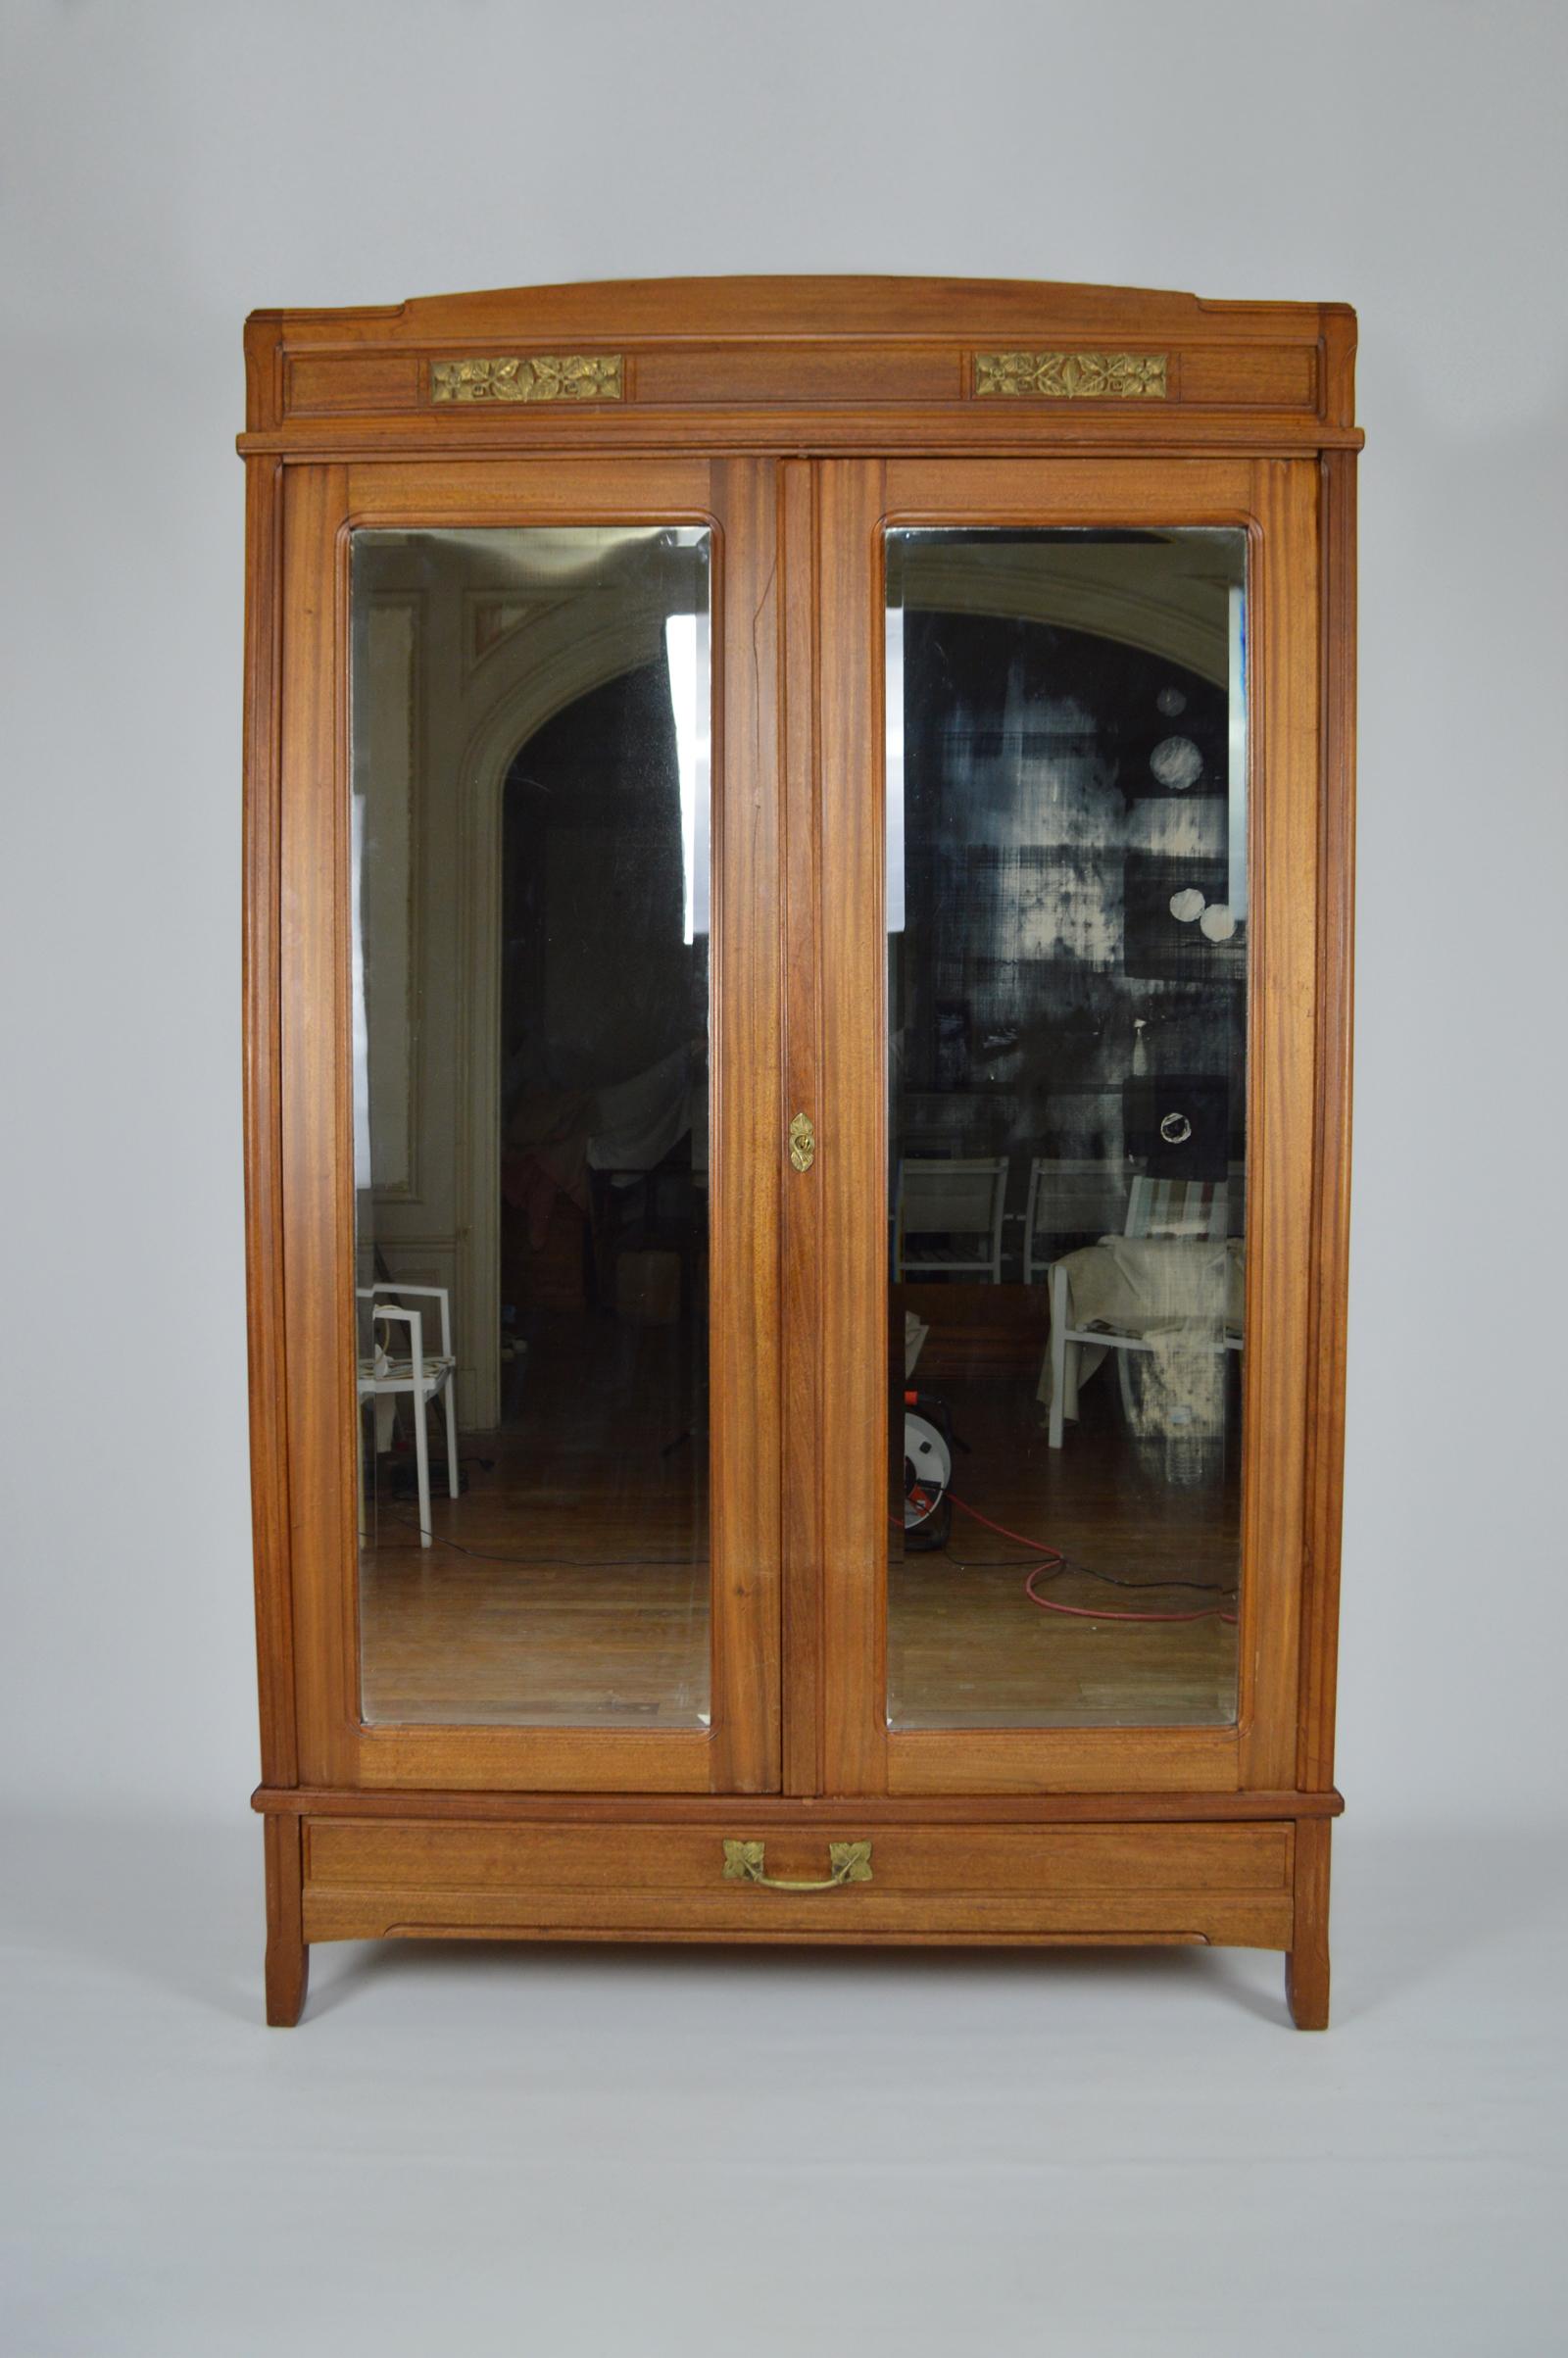 Large double-door mahogany wardrobe / cabinet with beveled mirrors.
On the outside we find a large drawer and a pediment enhanced with beautiful decorative bronzes.
The interior consists of 4 shelves and 2 small drawers.

All the bronze elements